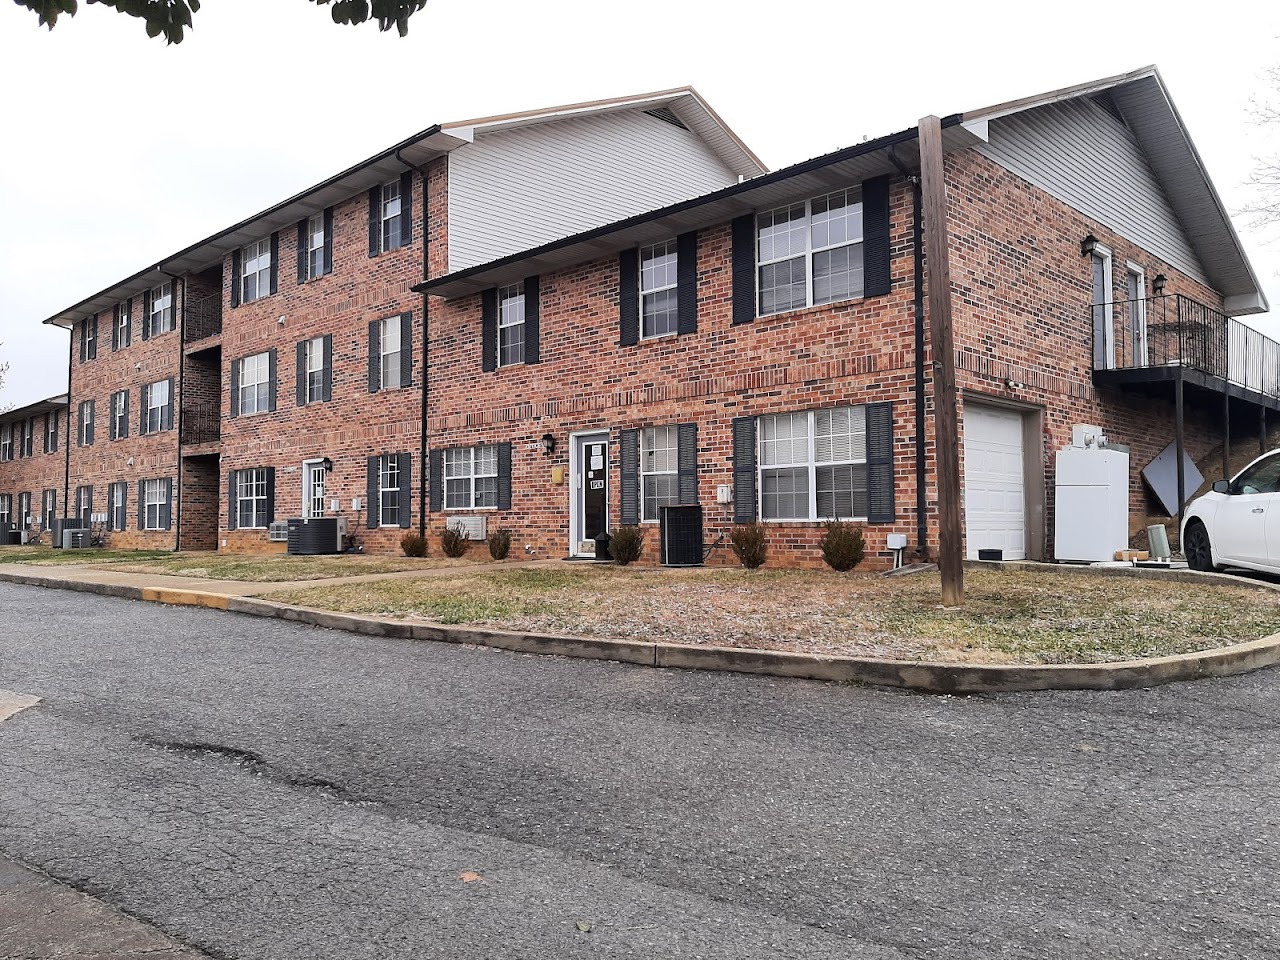 Photo of CRESTVIEW TERRACE APTS. Affordable housing located at 1600 HWY 70 BYP GREENEVILLE, TN 37743